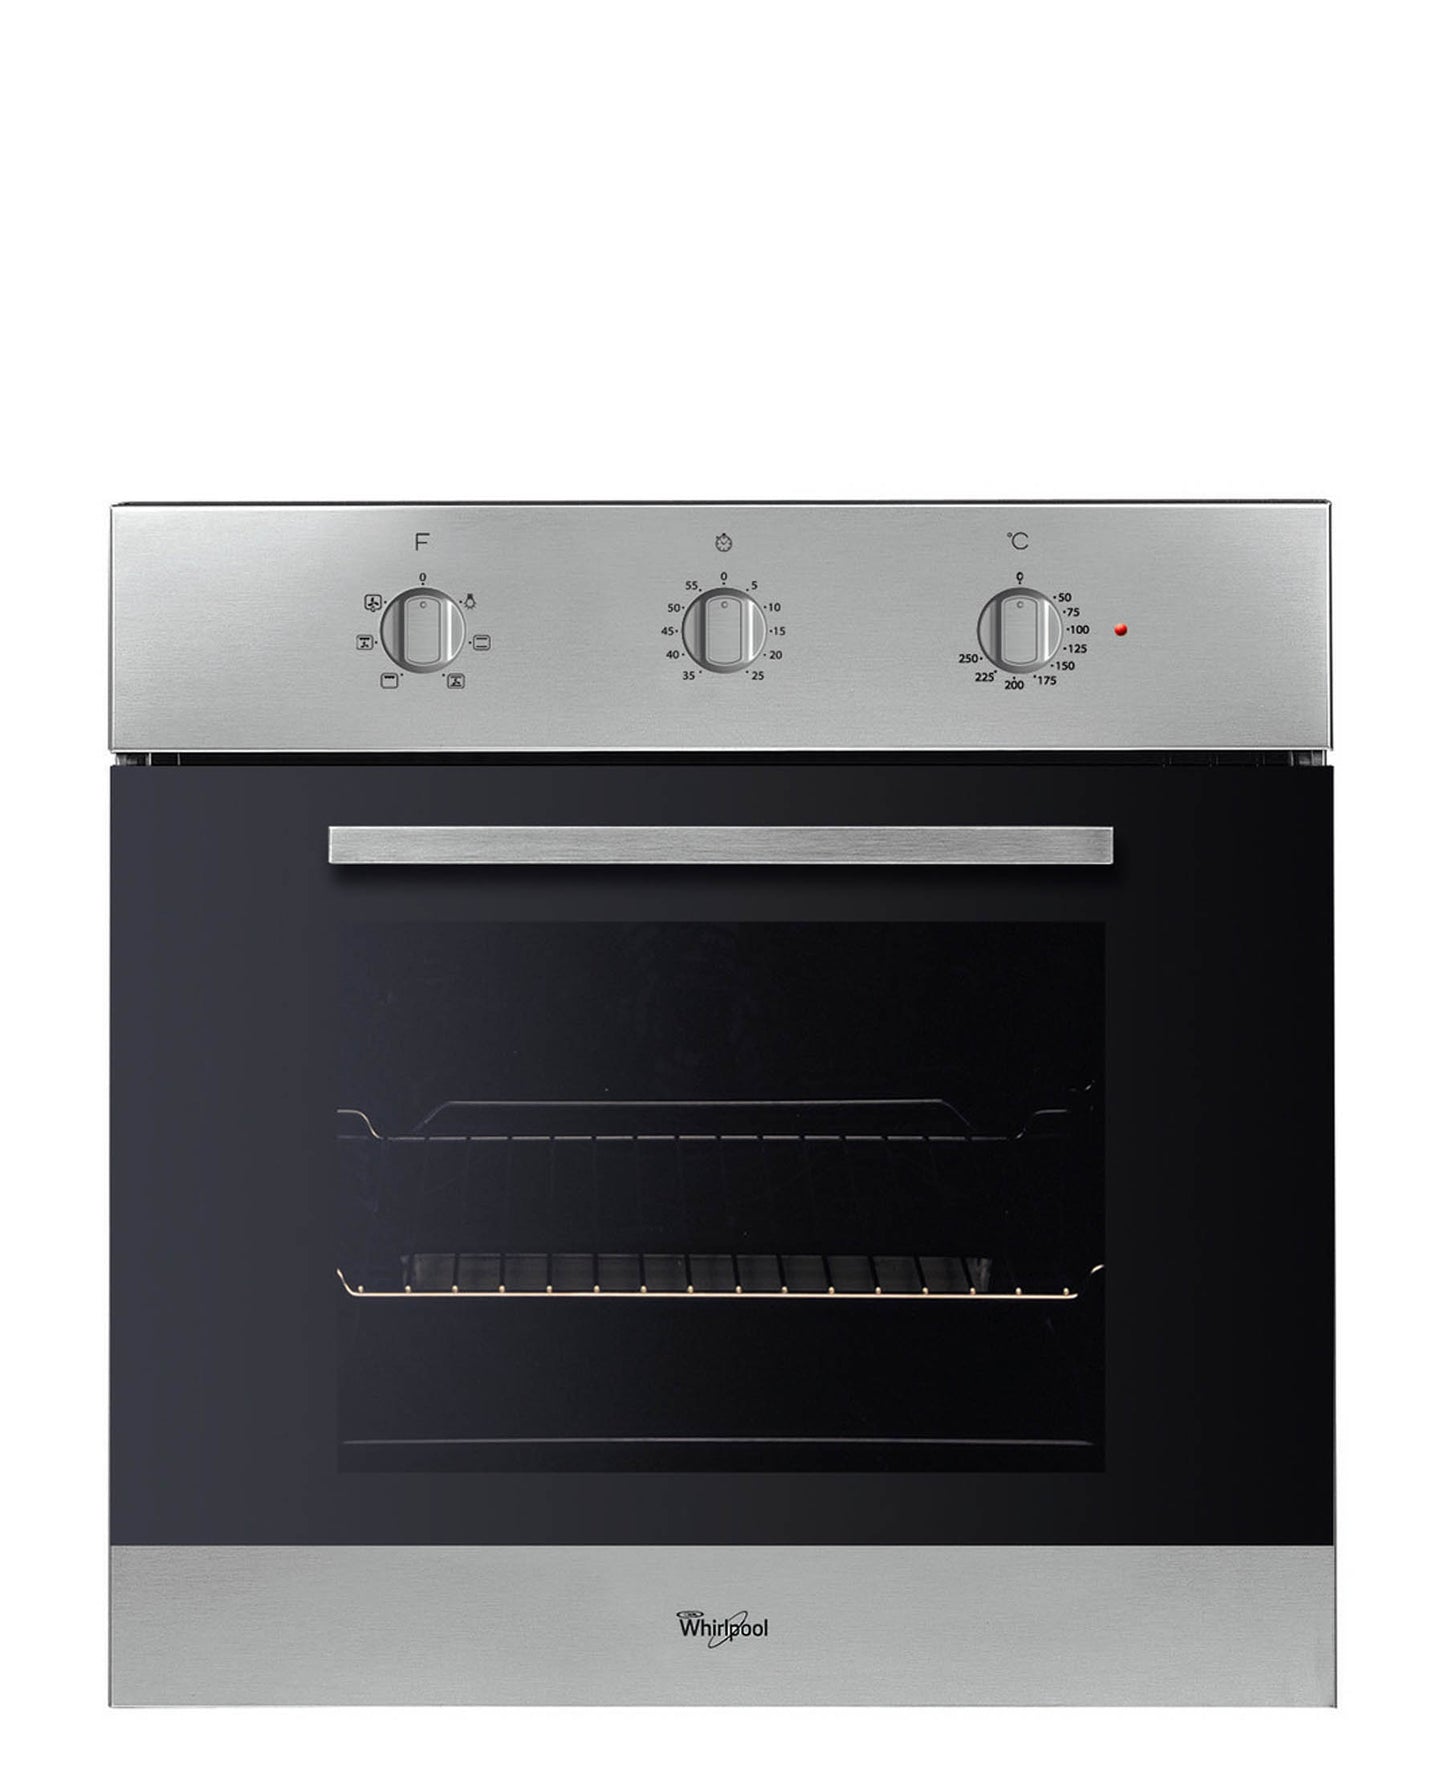 Whirlpool built -in electric oven - inox colour